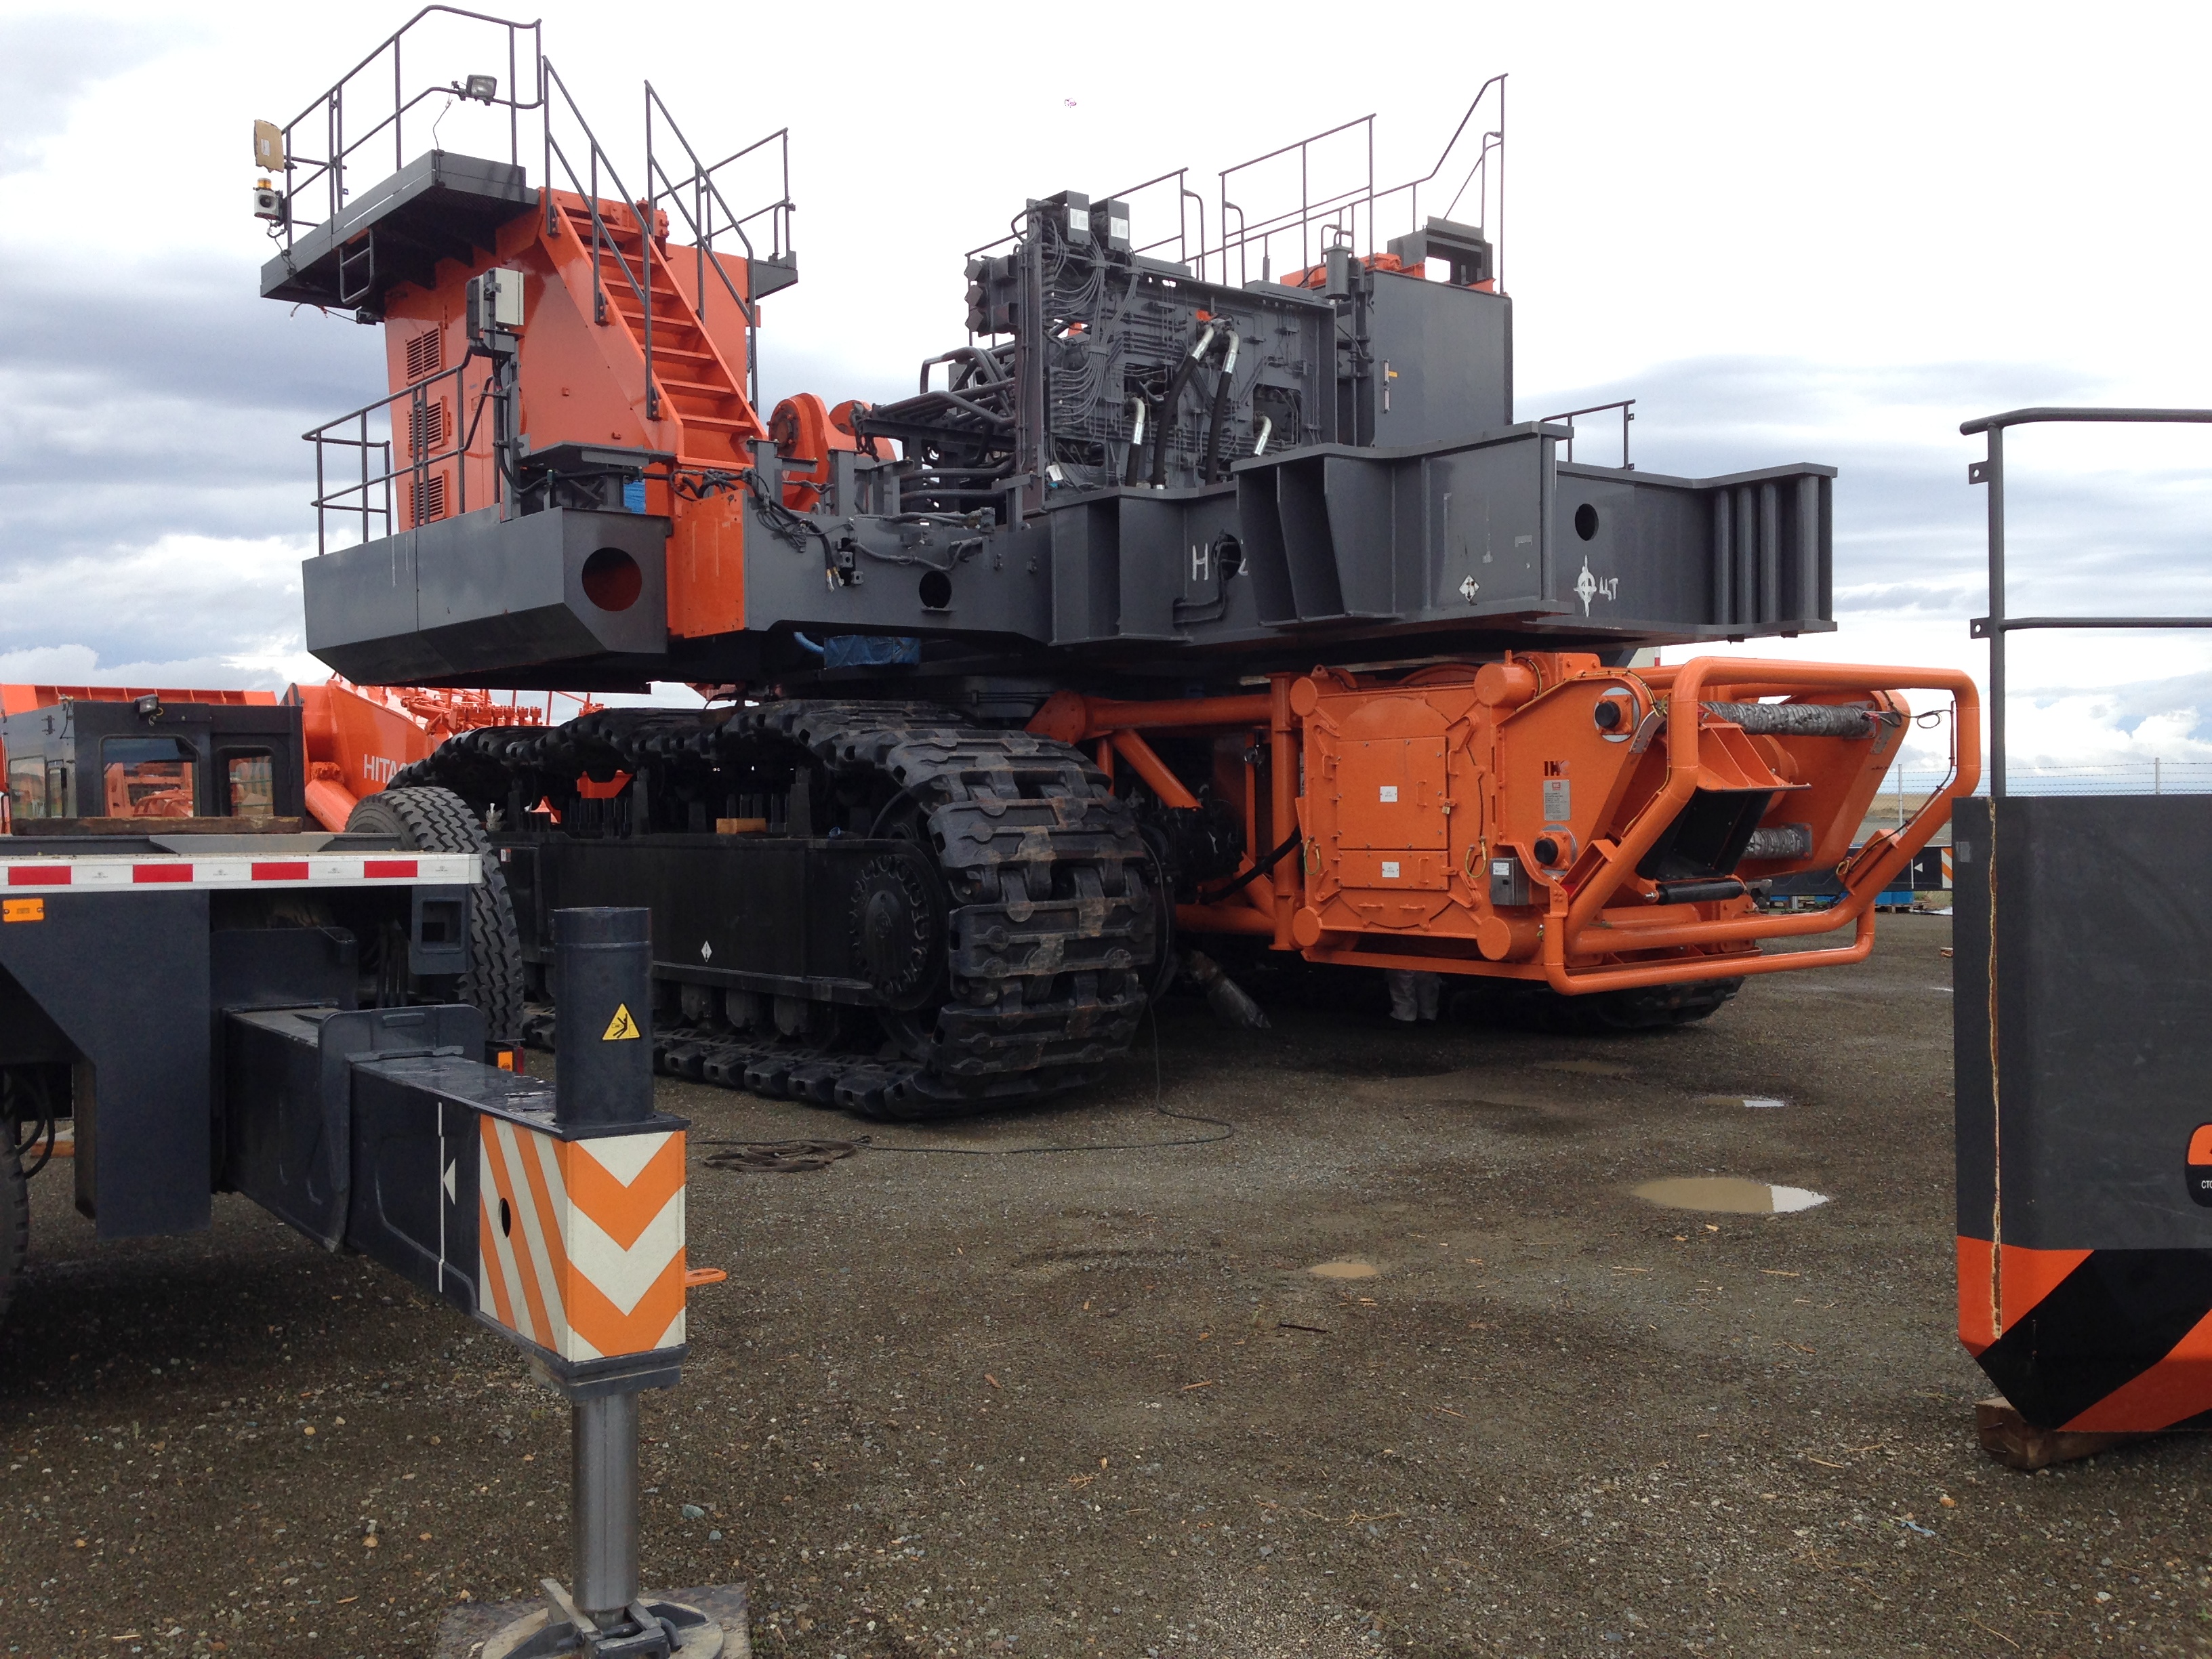 The EX3600 trailing cable reeler